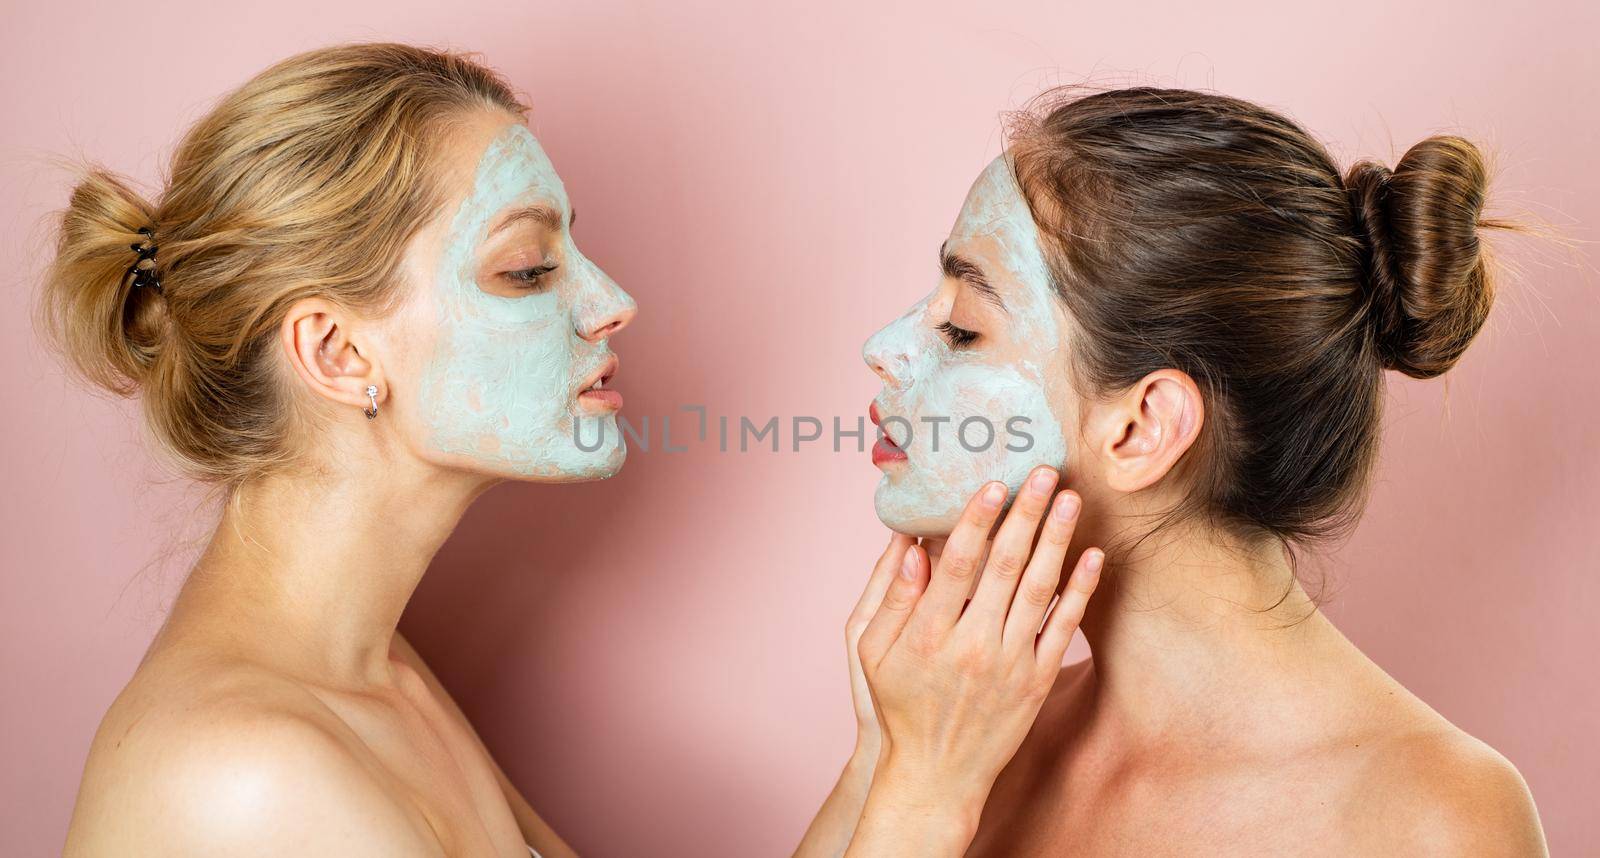 Healthy natural tender girls do beauty spa procedures with clay mud mask at face. Happy funny mood. Healthy and wellness concept. Women with bare shoulders do spa procedures